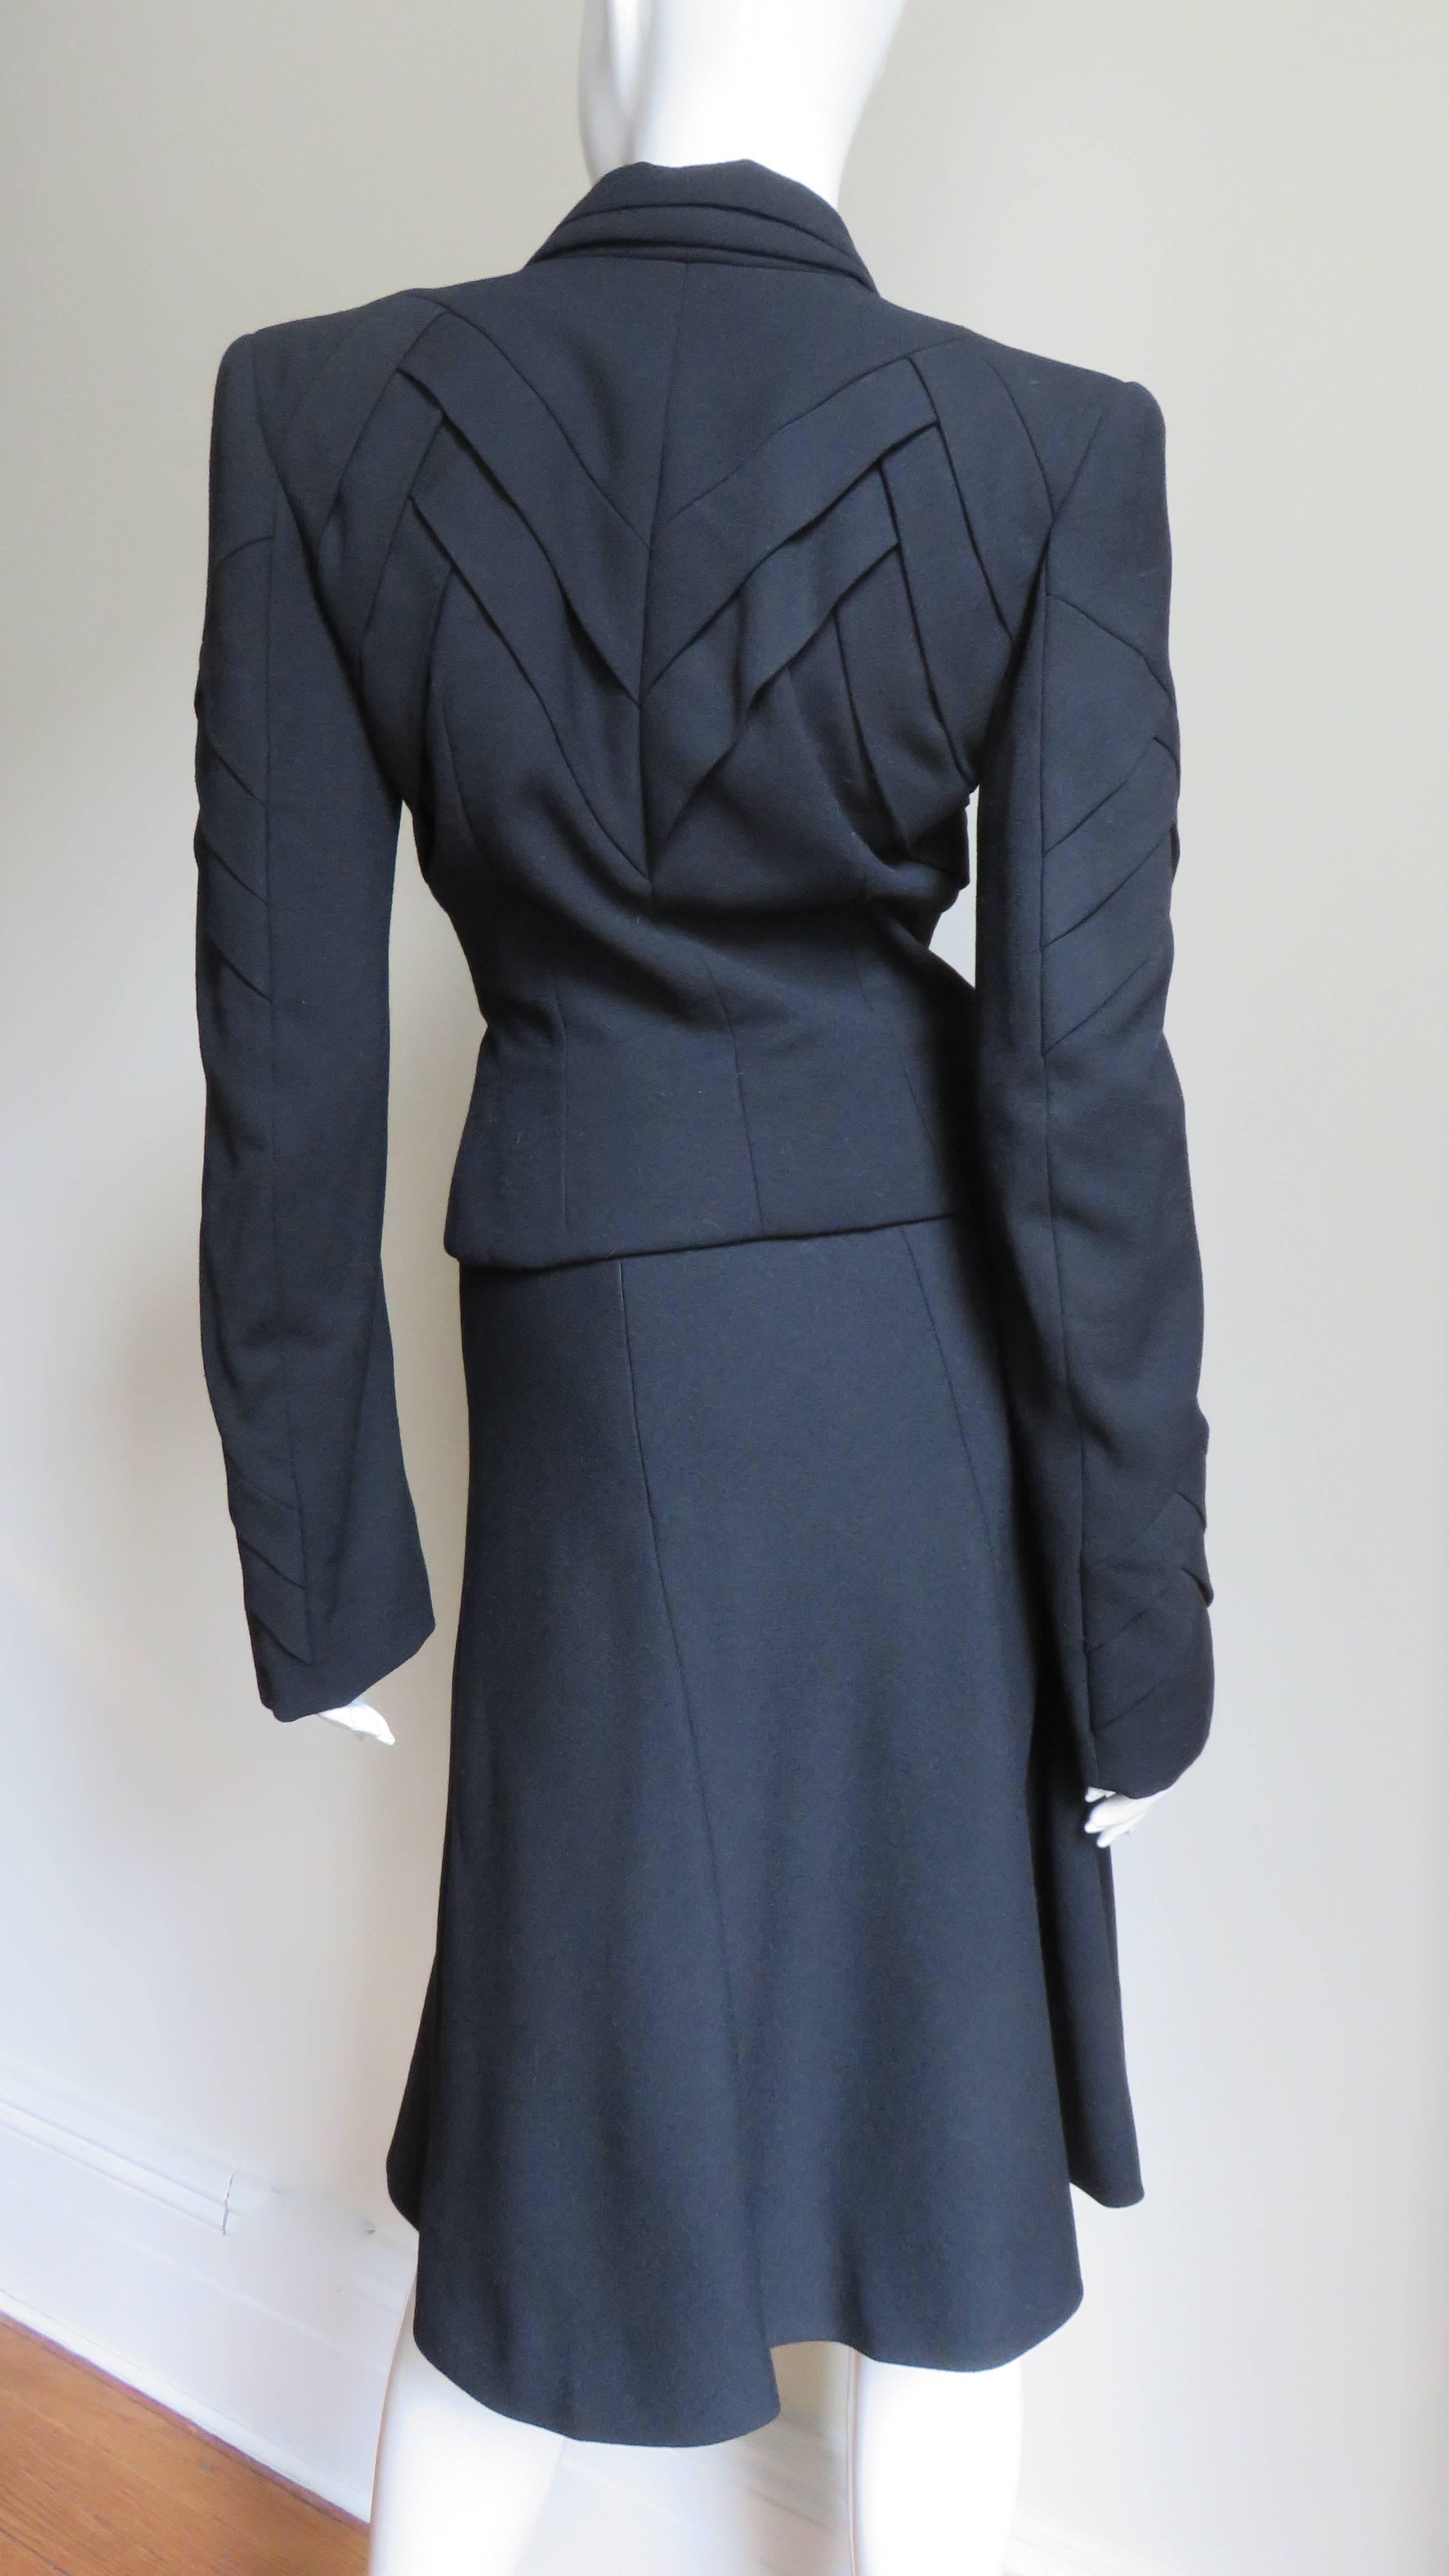 John Galliano New Runway Skirt Suit with Elaborate Detail 1990s For Sale 2